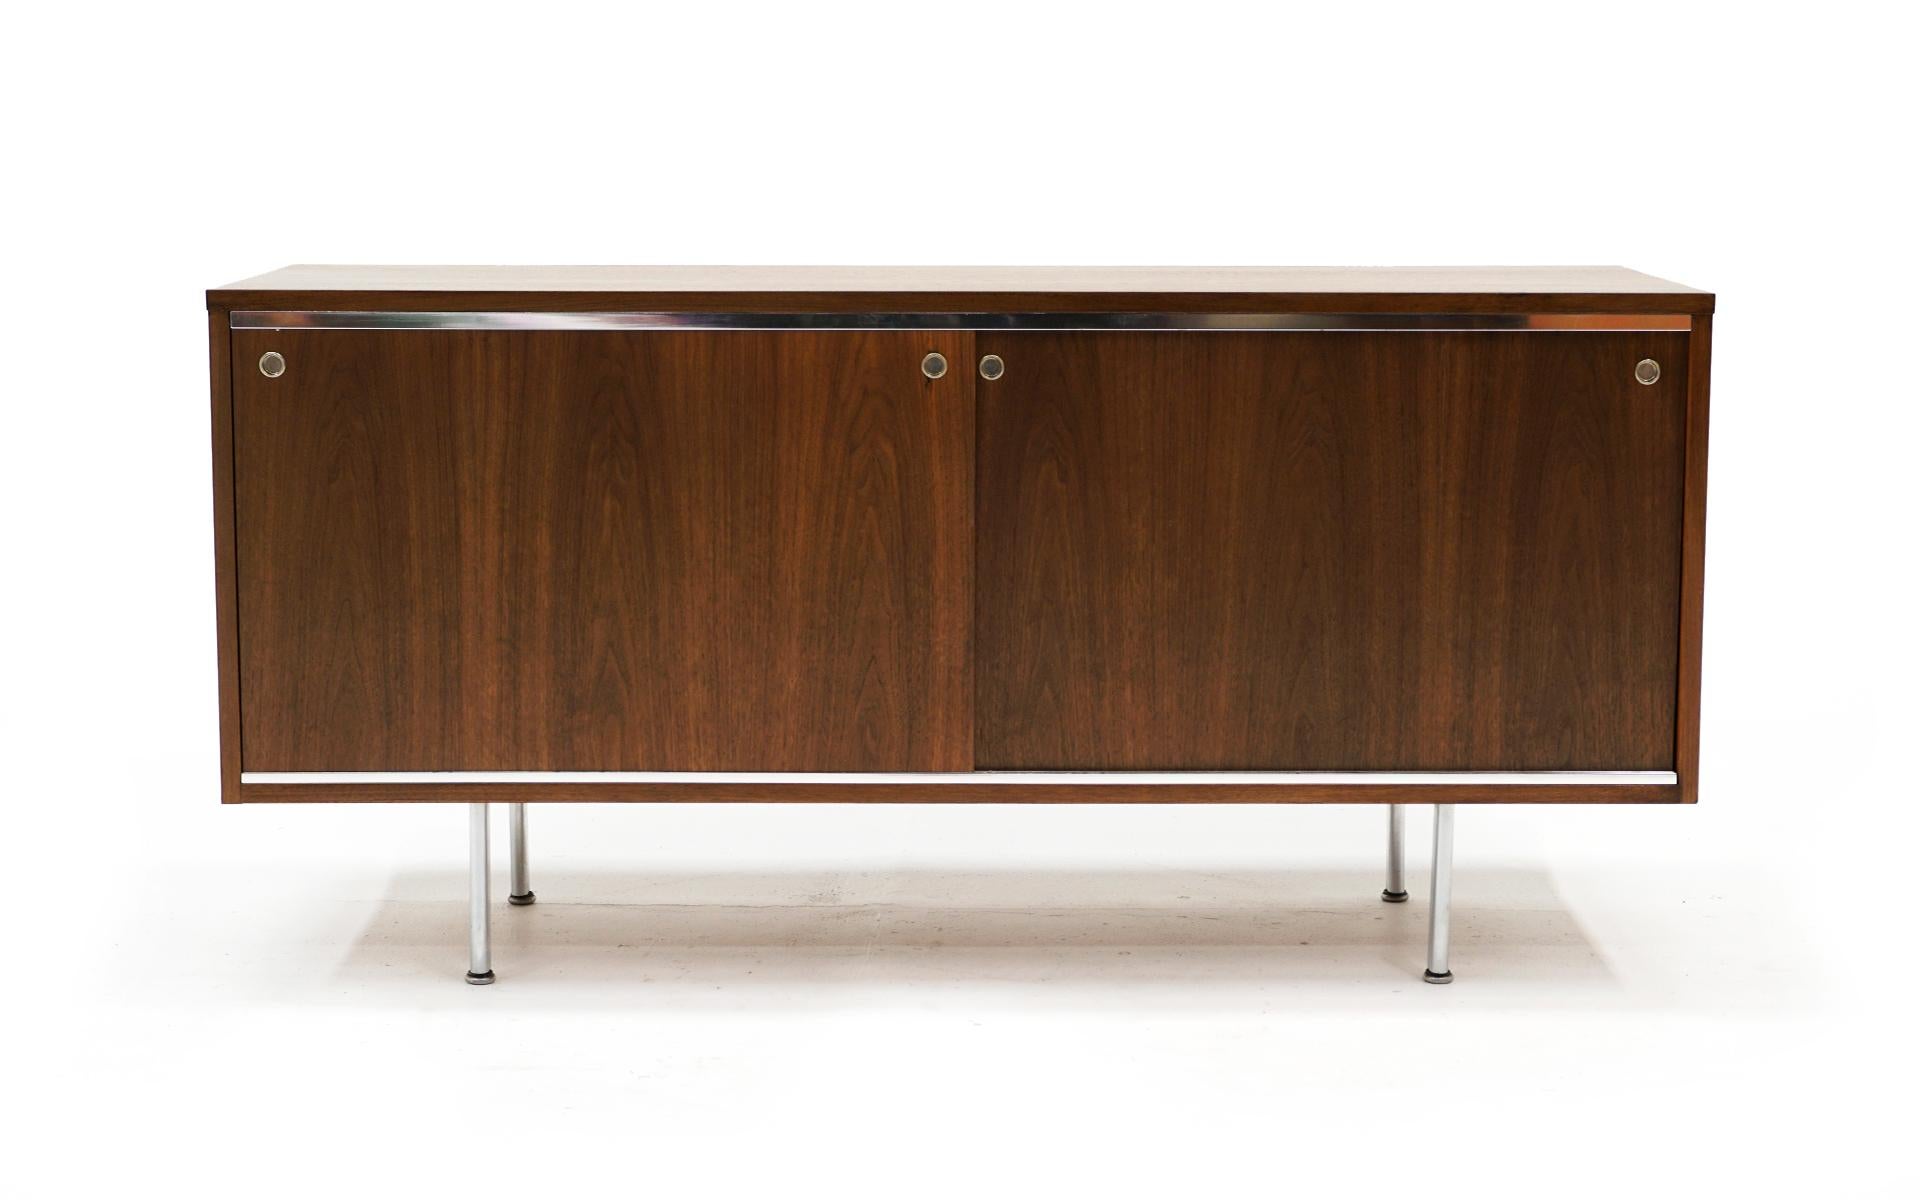 George Nelson for Herman Miller credenza / sideboard / storage / media cabinet. Expertly refinished. Walnut case with walnut sliding doors revealing storage space with an adjustable shelf. The width of the openings makes this ideal for media